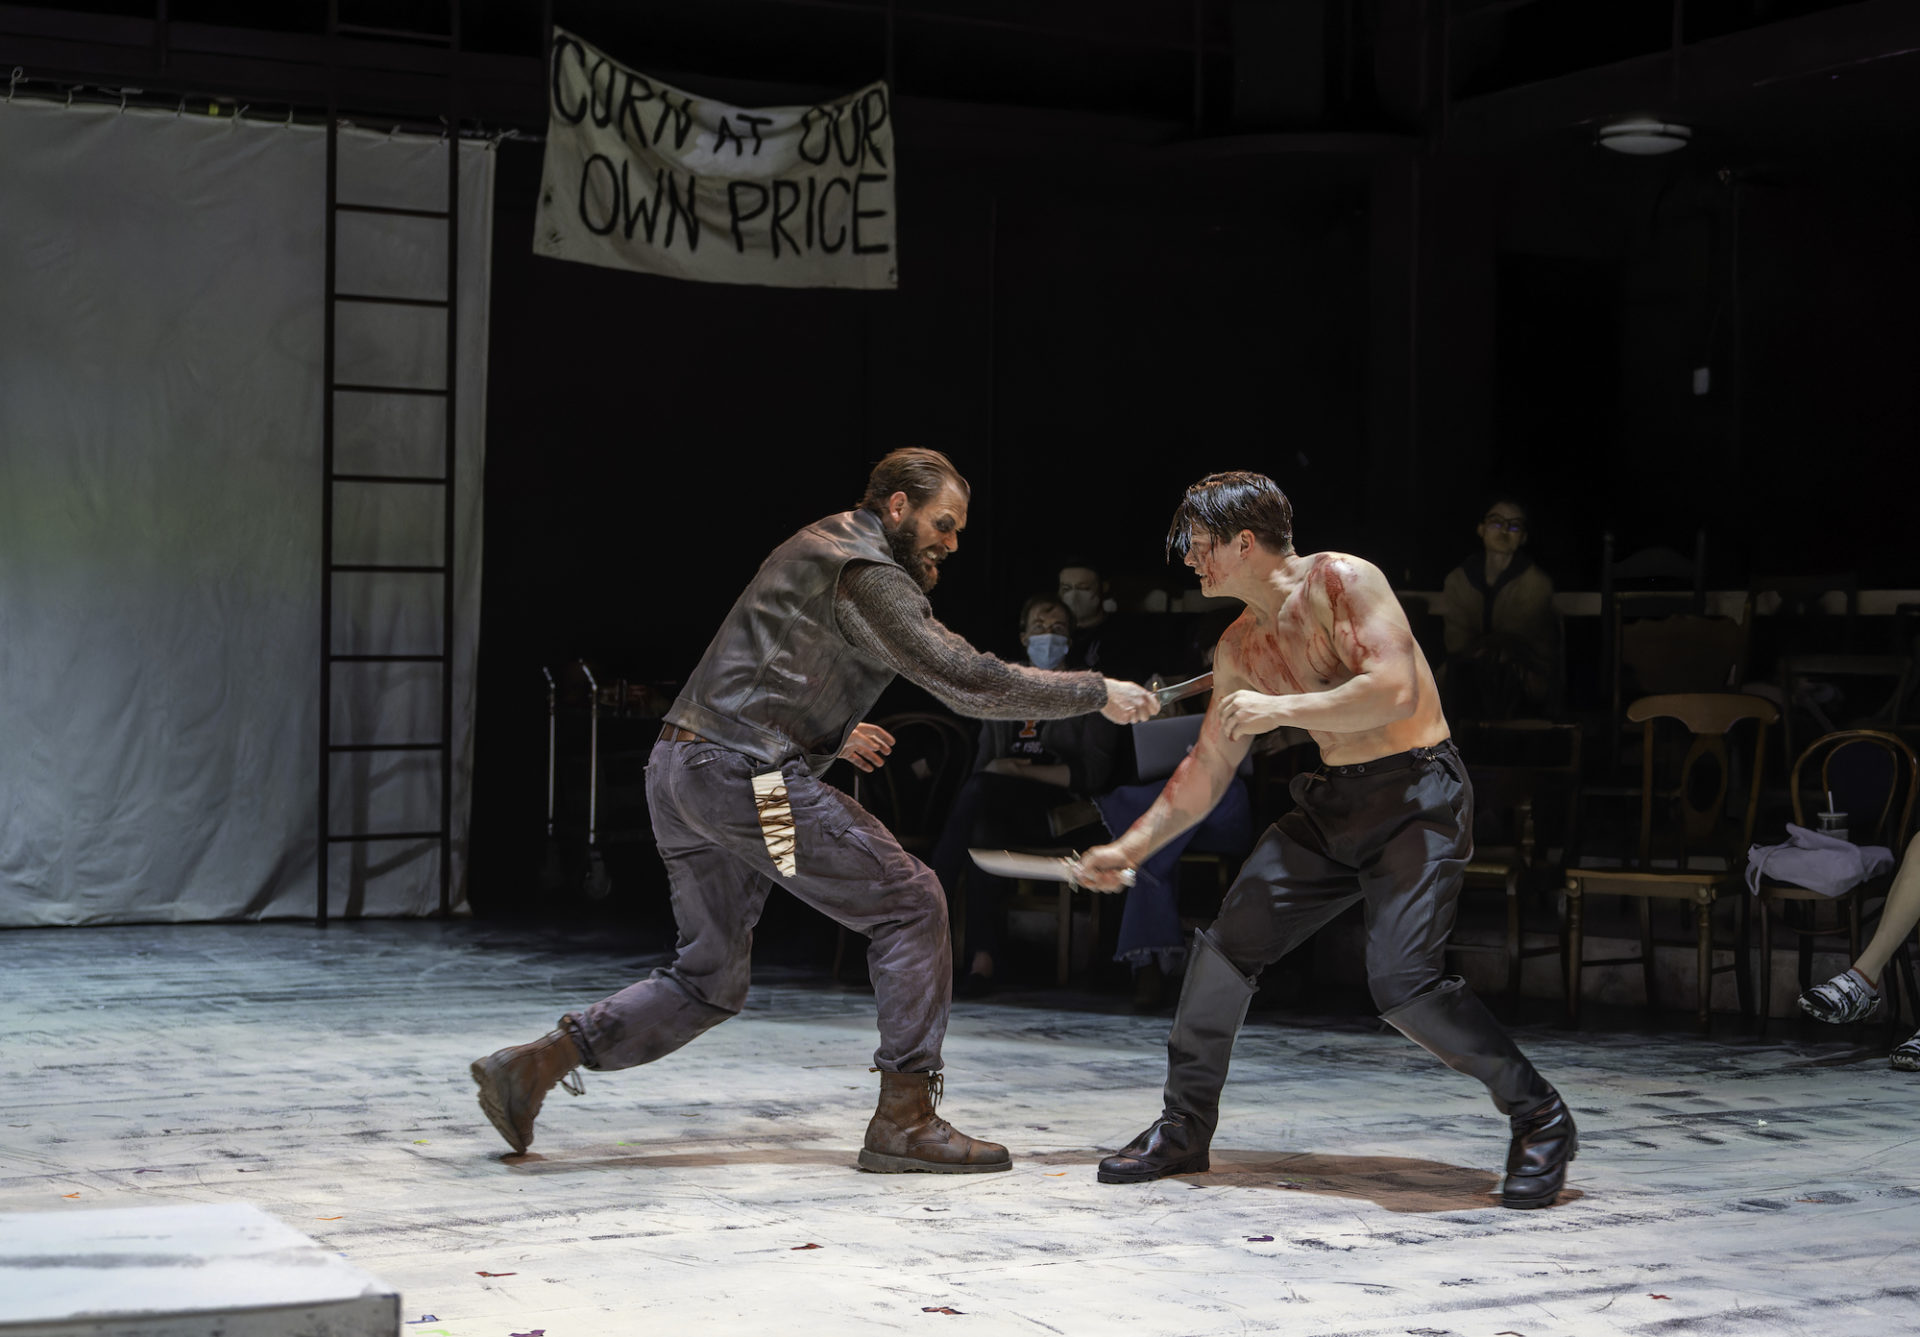 Two men engage in a fight scene. The man on the left is fully clothed in pants, boots, and a jacket. He is attempting to stab the man on the right who is also holding a knife. The man on the right appears to be covered in blood and is shirtless.